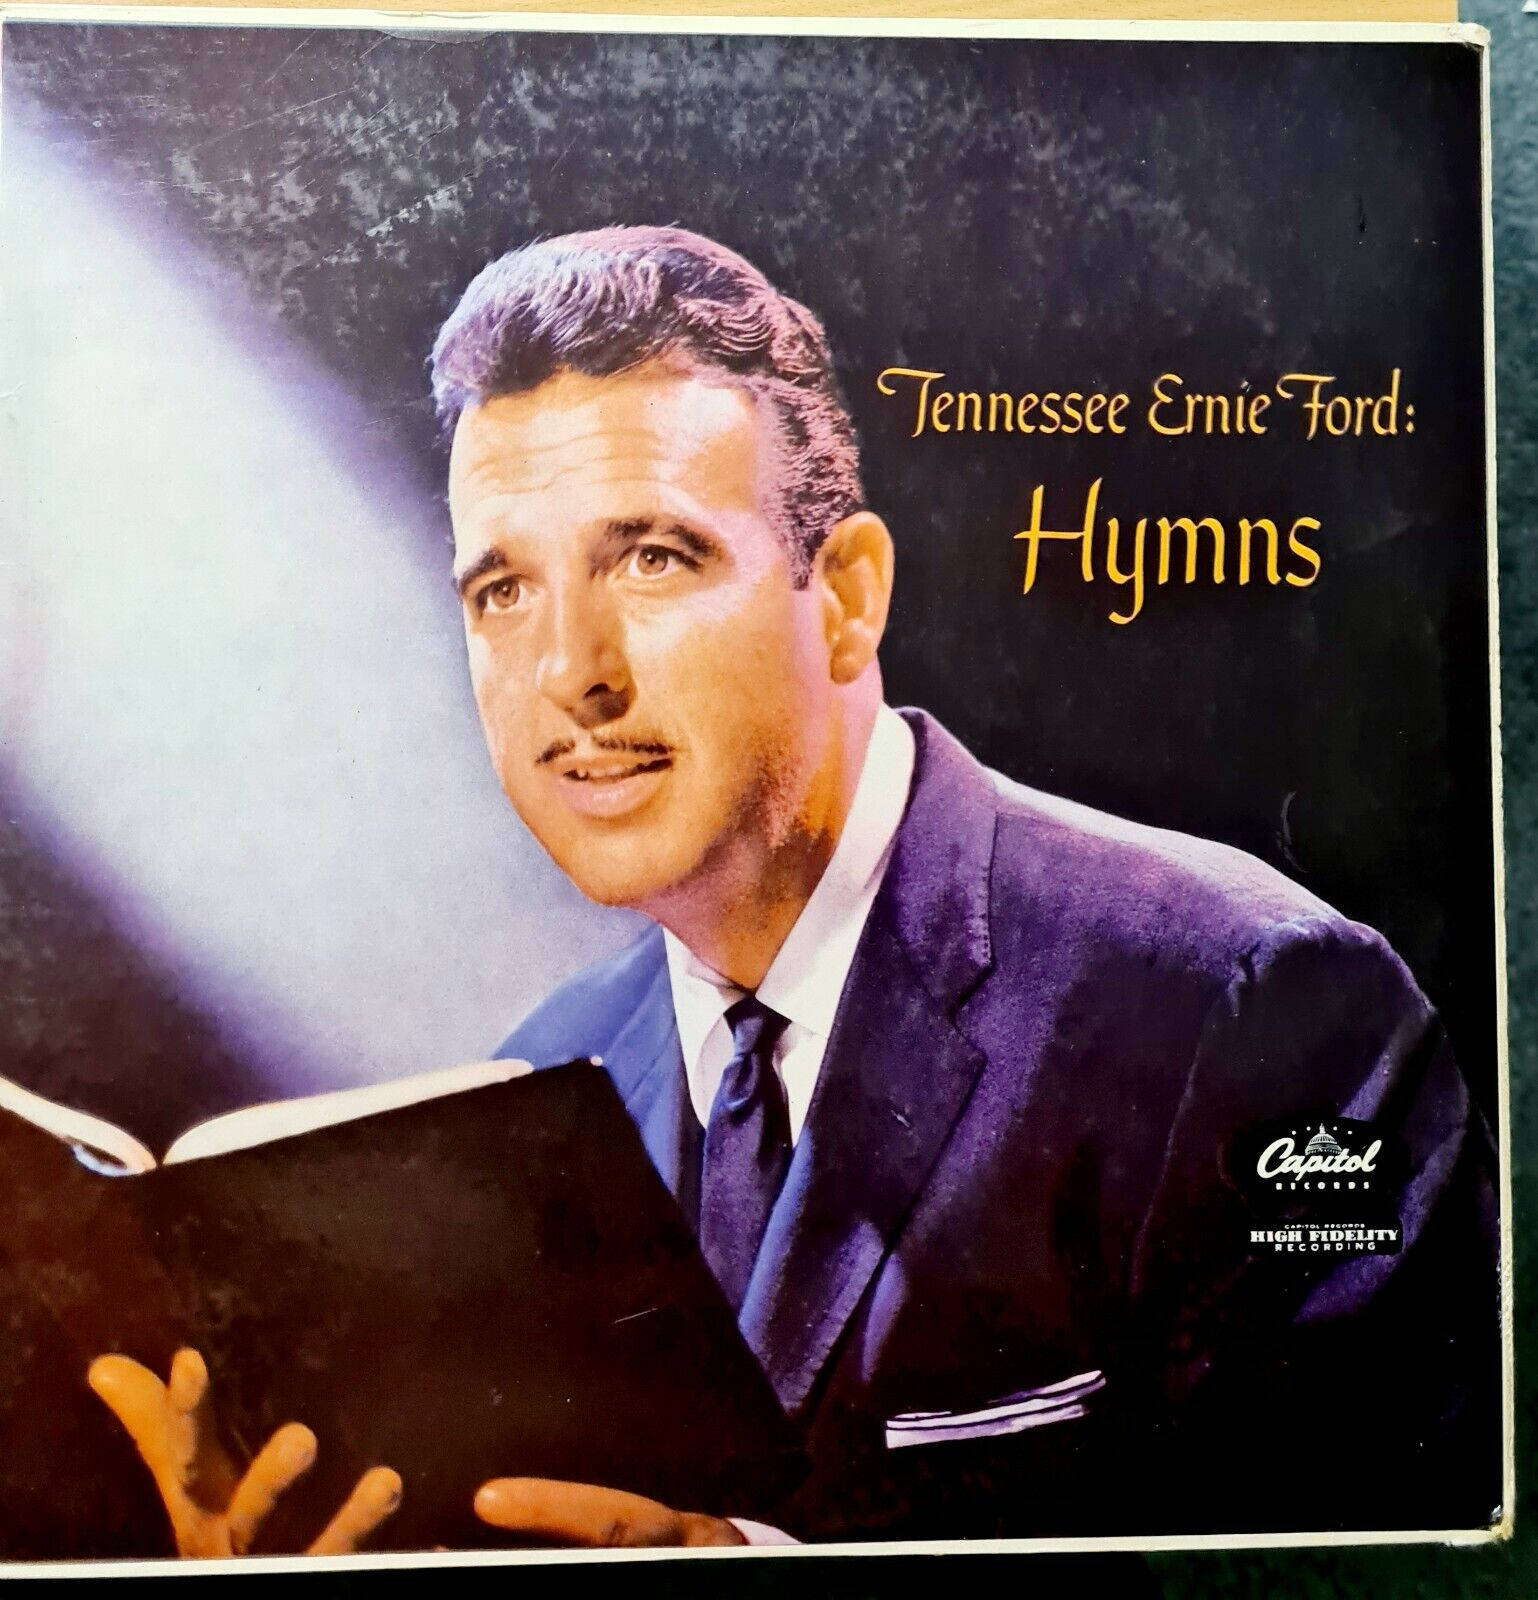 Tennessee Ernie Ford passionately singing at a recording session. Wallpaper